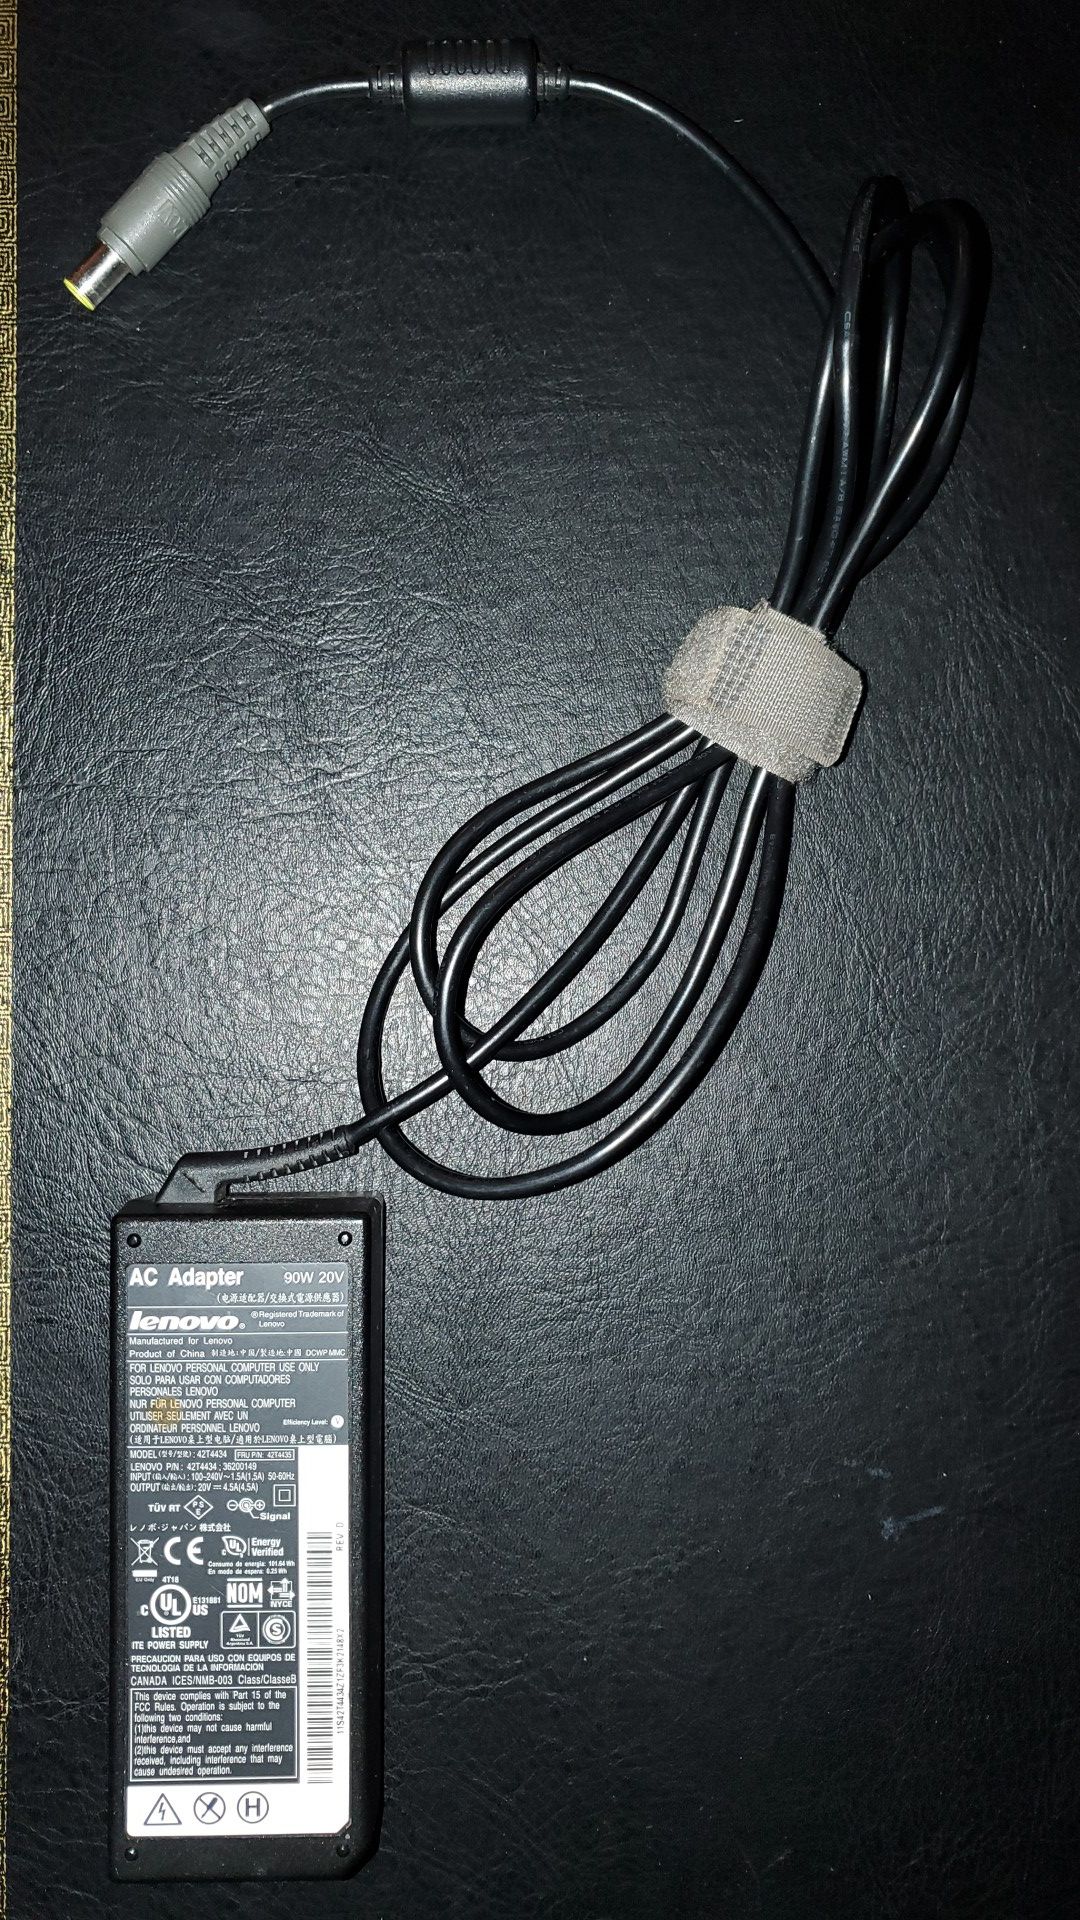 Lenovo 90W adapter for thinkpad or other laptops